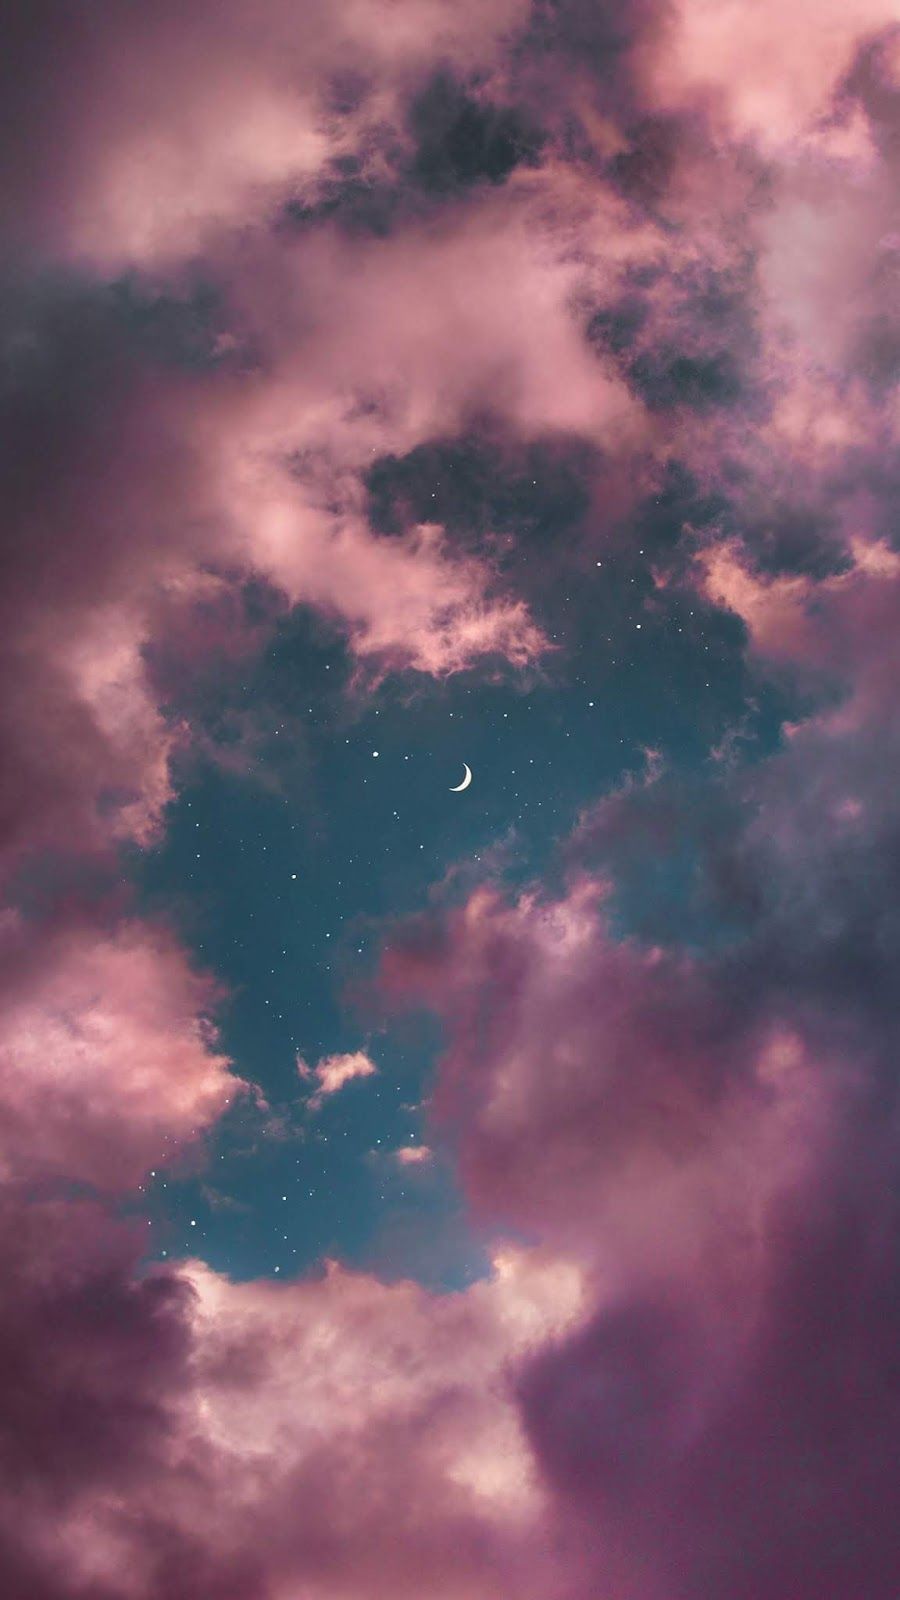 IPhone wallpaper of a cloudy sky with a crescent moon and stars. - Moon